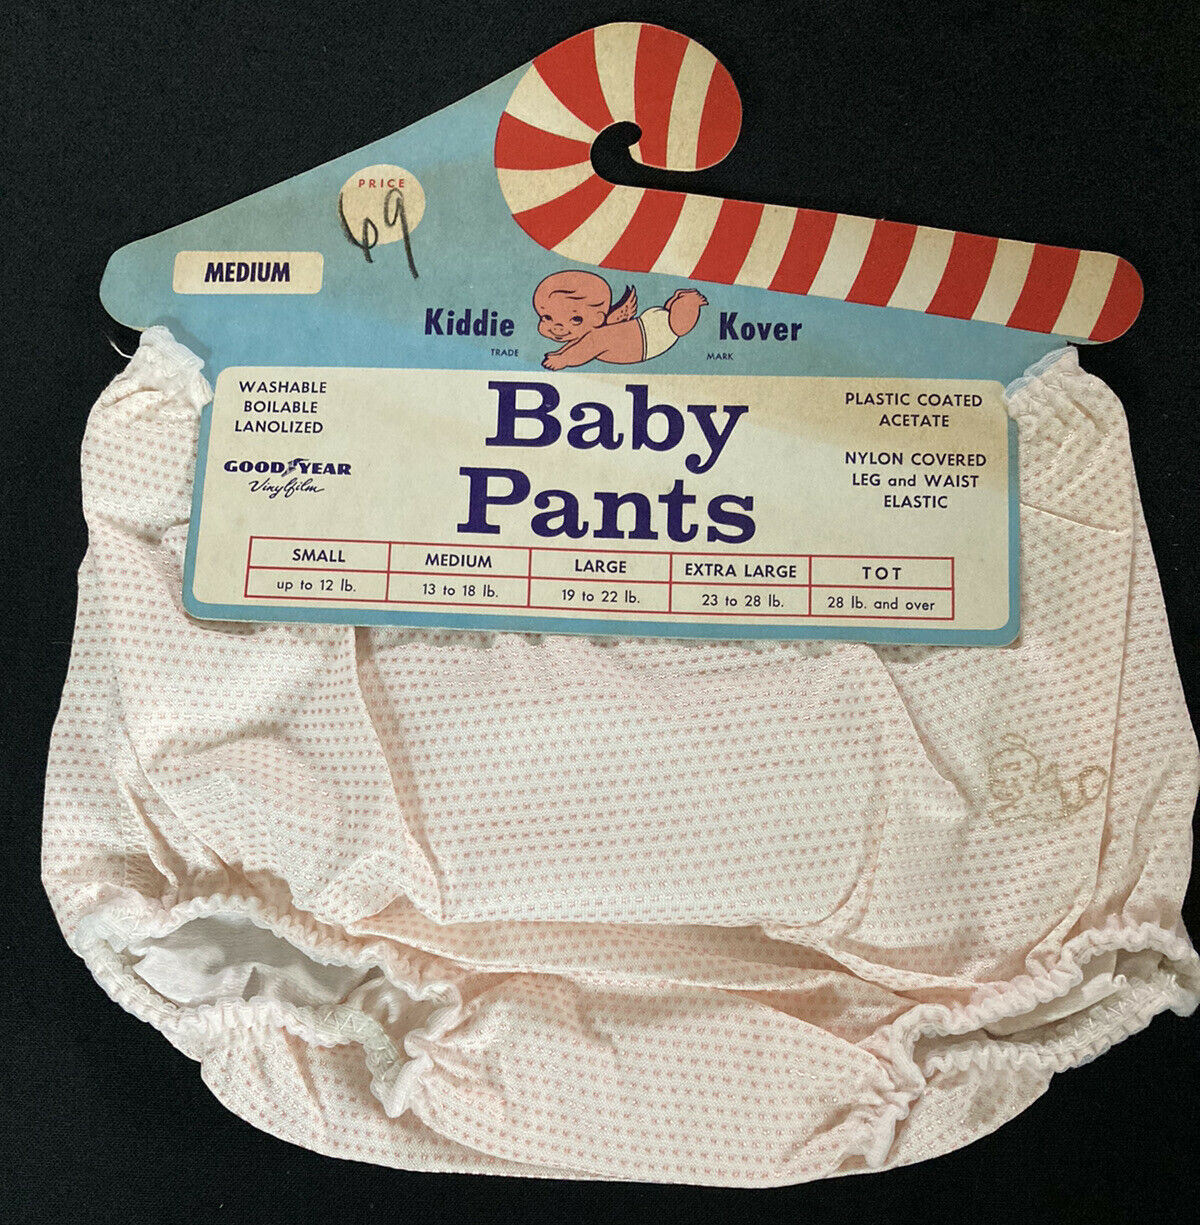 Nos Vtg Size Medium Pink On White Kiddie Kover Baby Pants Plastic-lined Goodyear